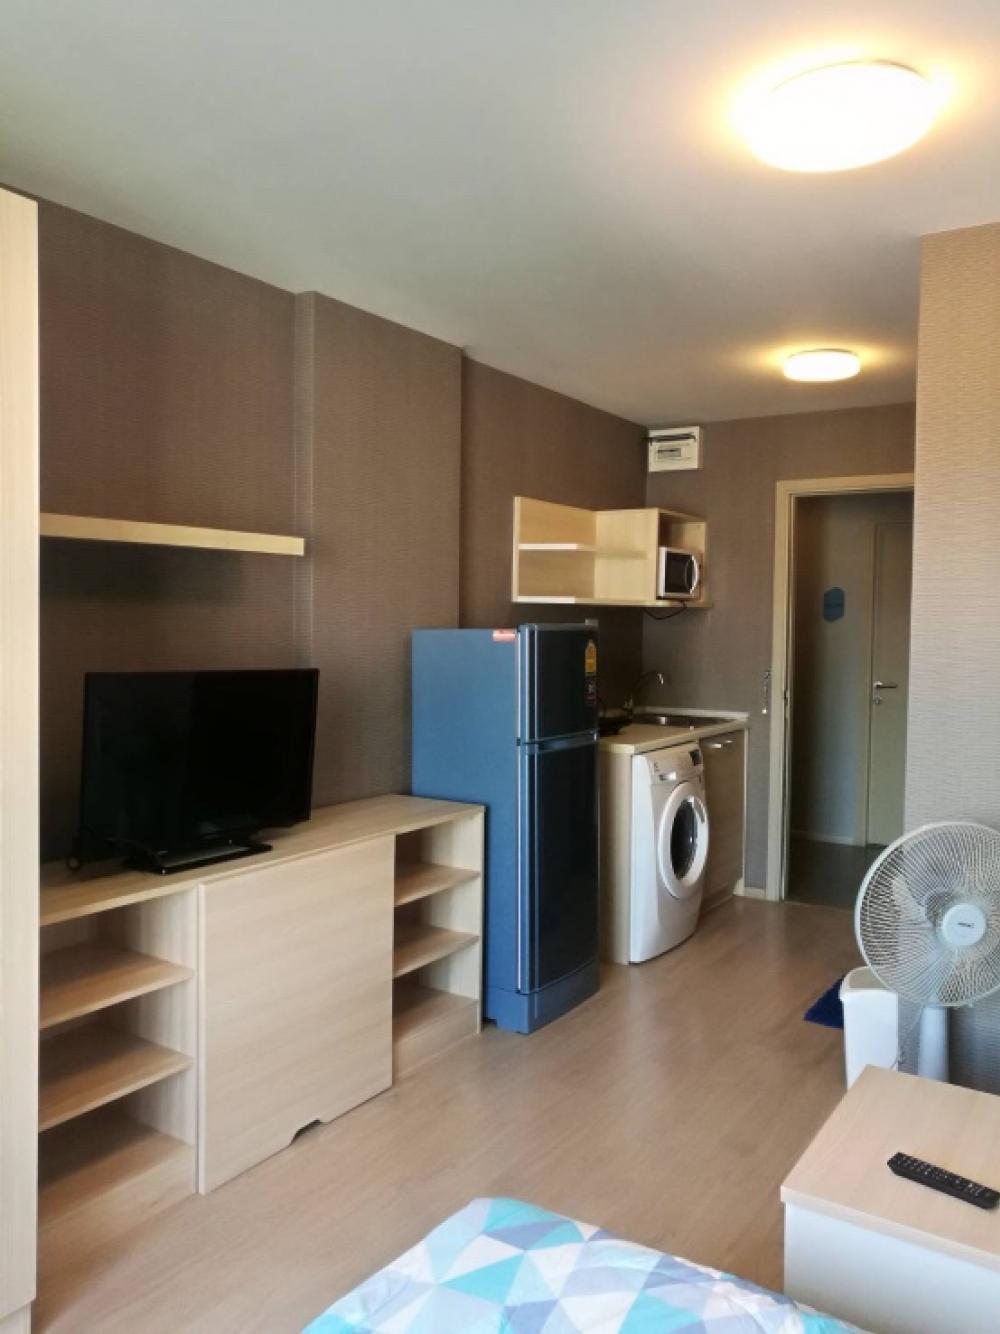 For RentCondoOnnut, Udomsuk : Elio Delray, size 24 sq m, ready to move in. There is a complete washing machine, price only 9,000.. Hurry, the room goes very quickly! Interested in making an appointment to view? 0614162636